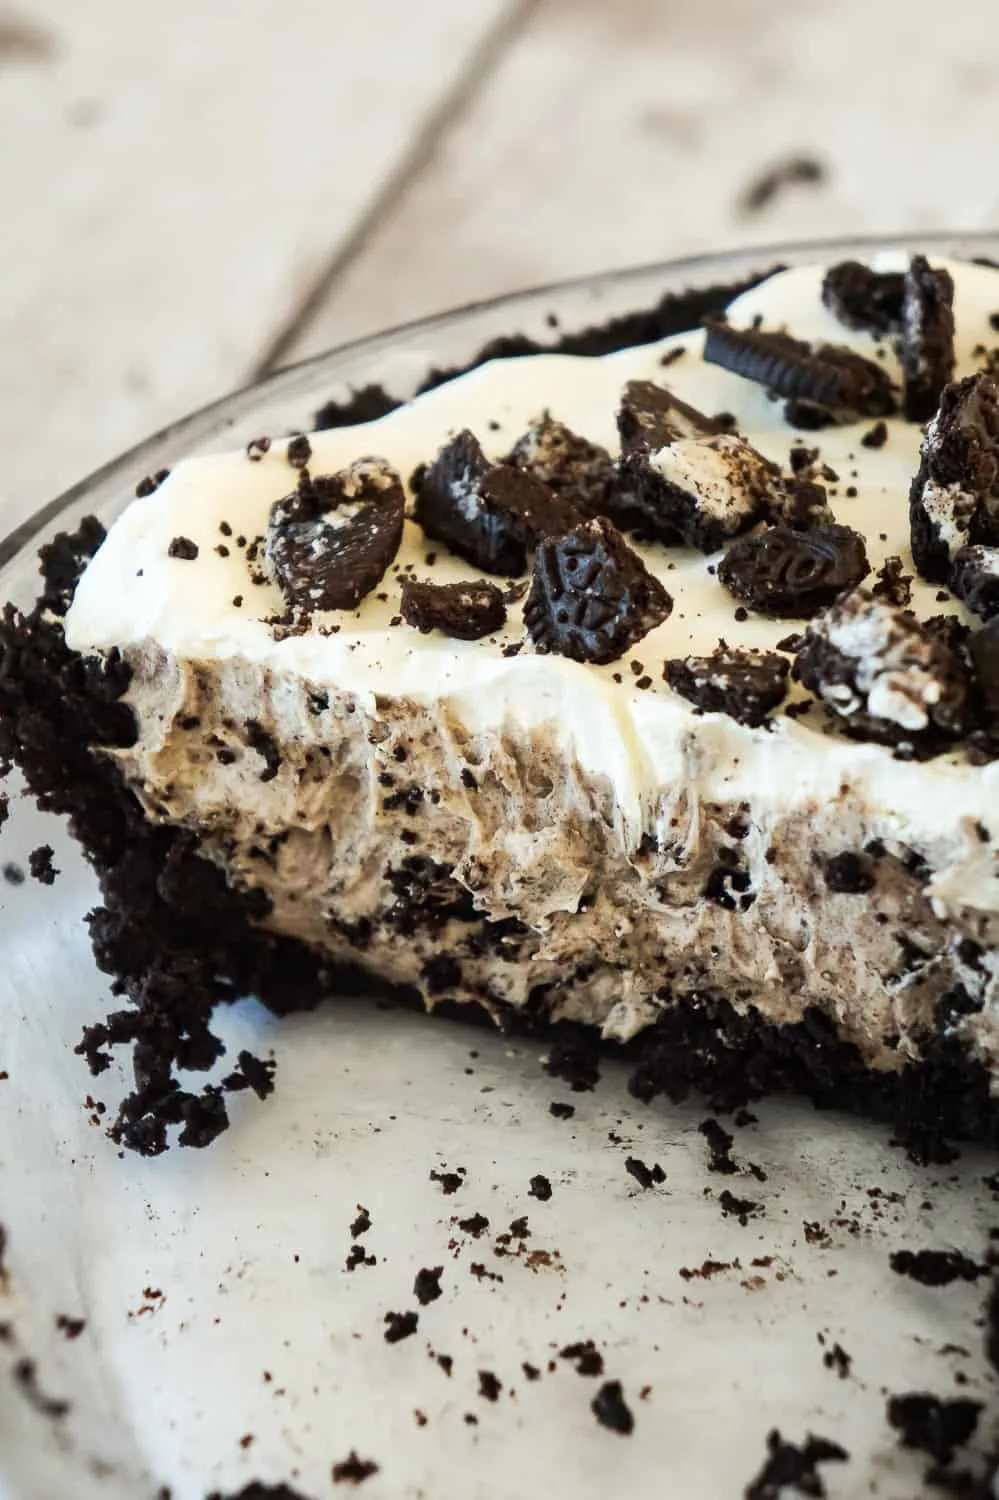 Oreo Pie is an easy no bake dessert recipe using vanilla instant pudding and a store bought Oreo crust. The creamy pudding and Cool Whip filling is loaded with white chocolate and crushed Oreo cookies.